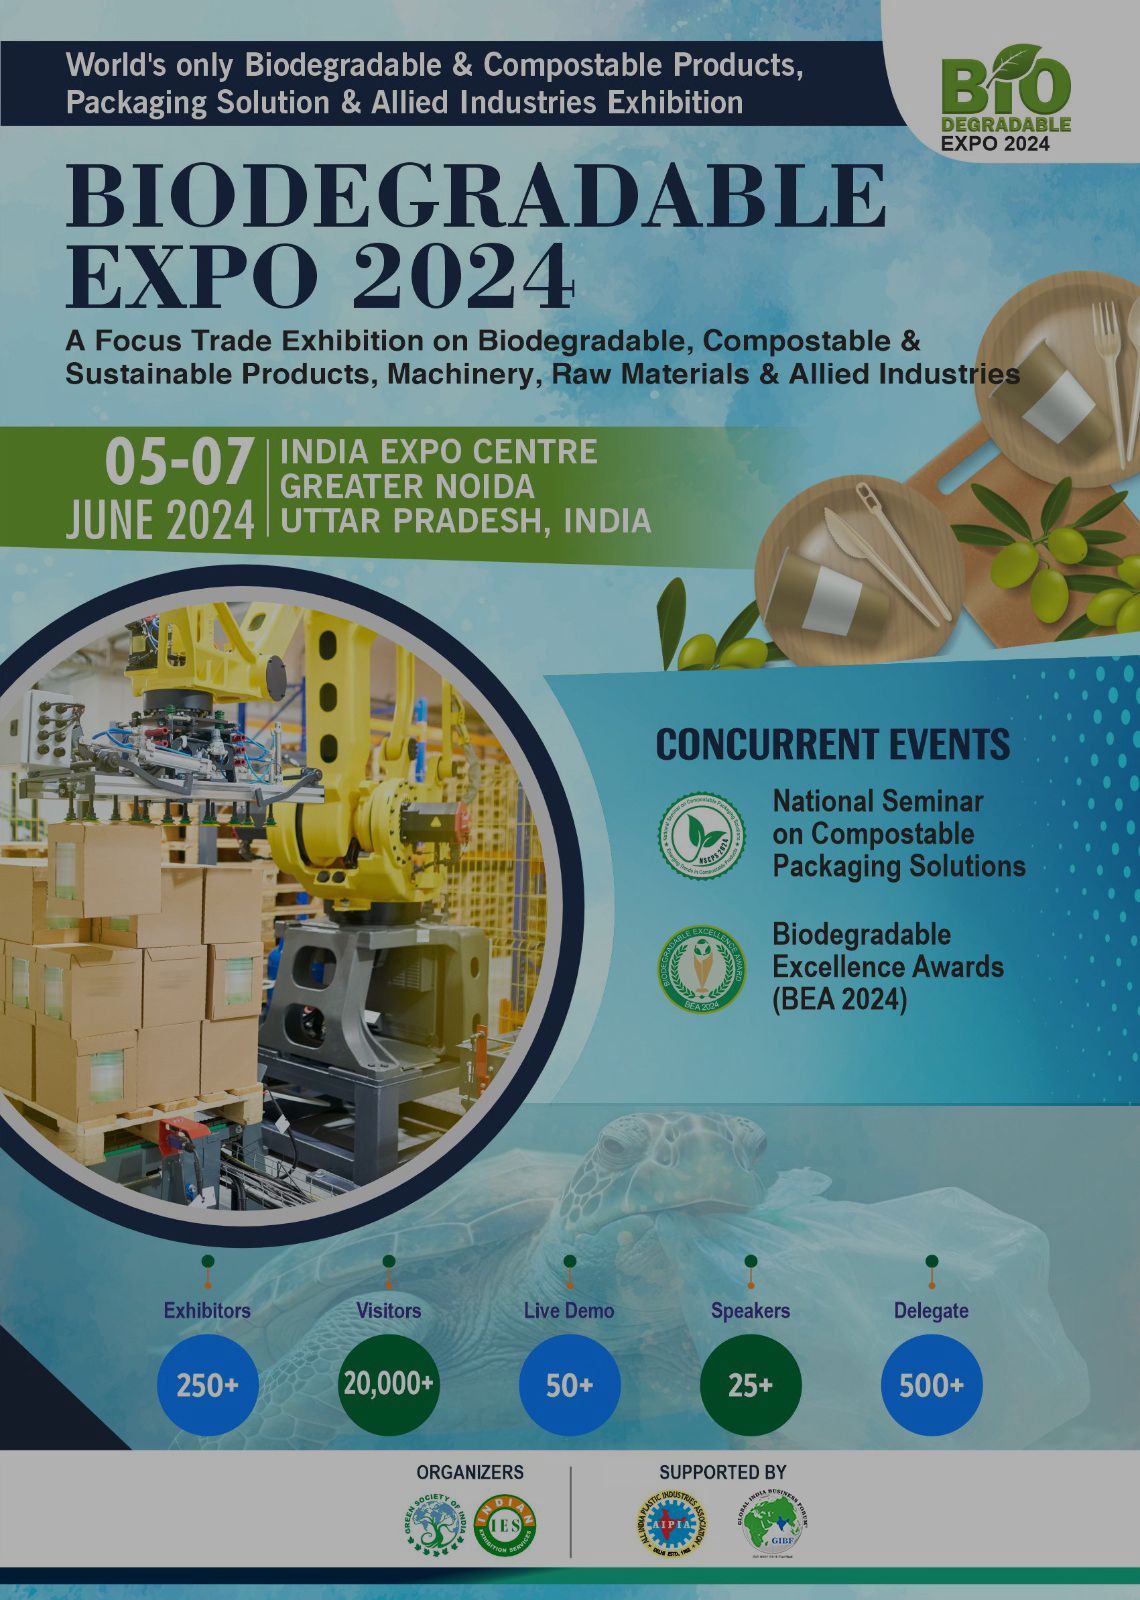 GIBF Collabrative Upcoming Event - Biodegradable Expo 2024